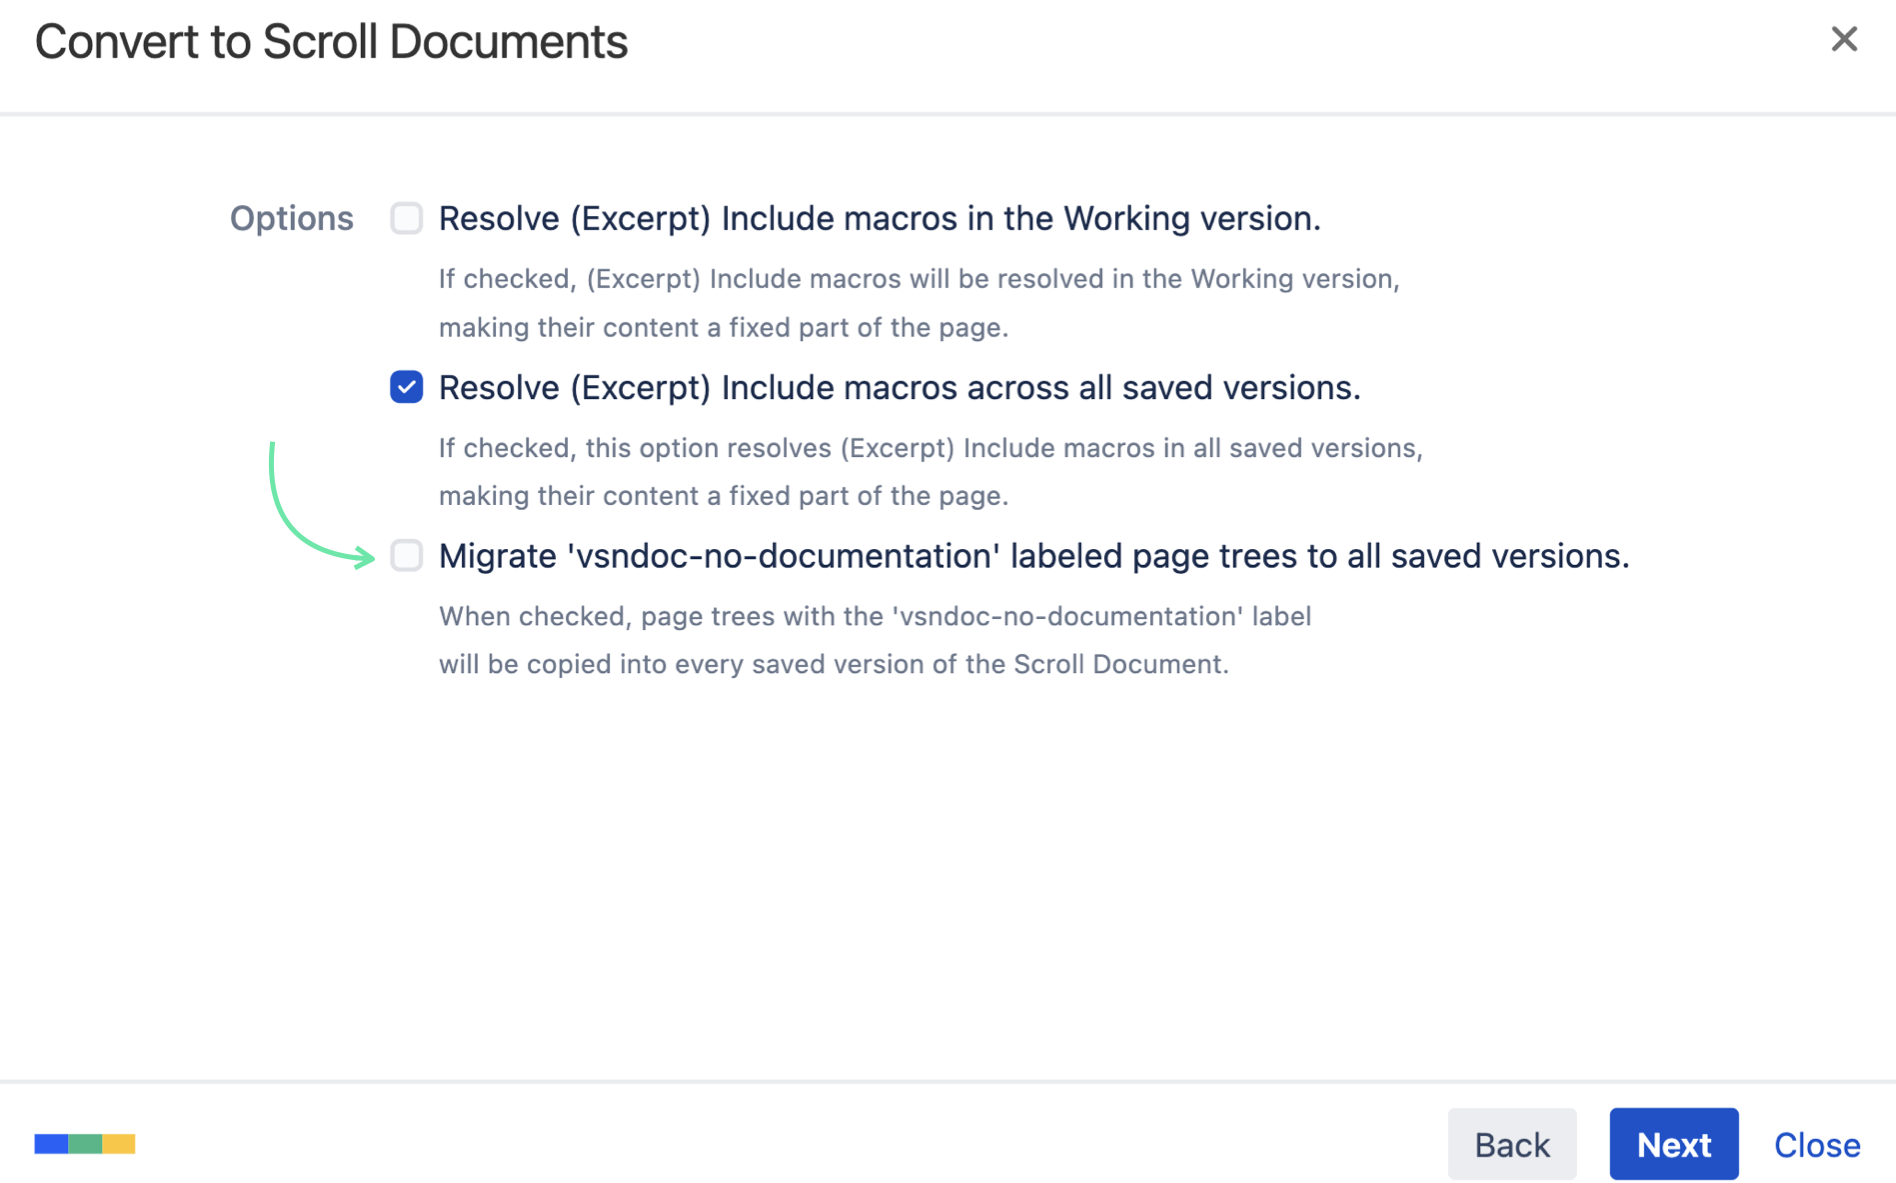 migrate-vsndoc-no-documentation-labeled-page-trees.png